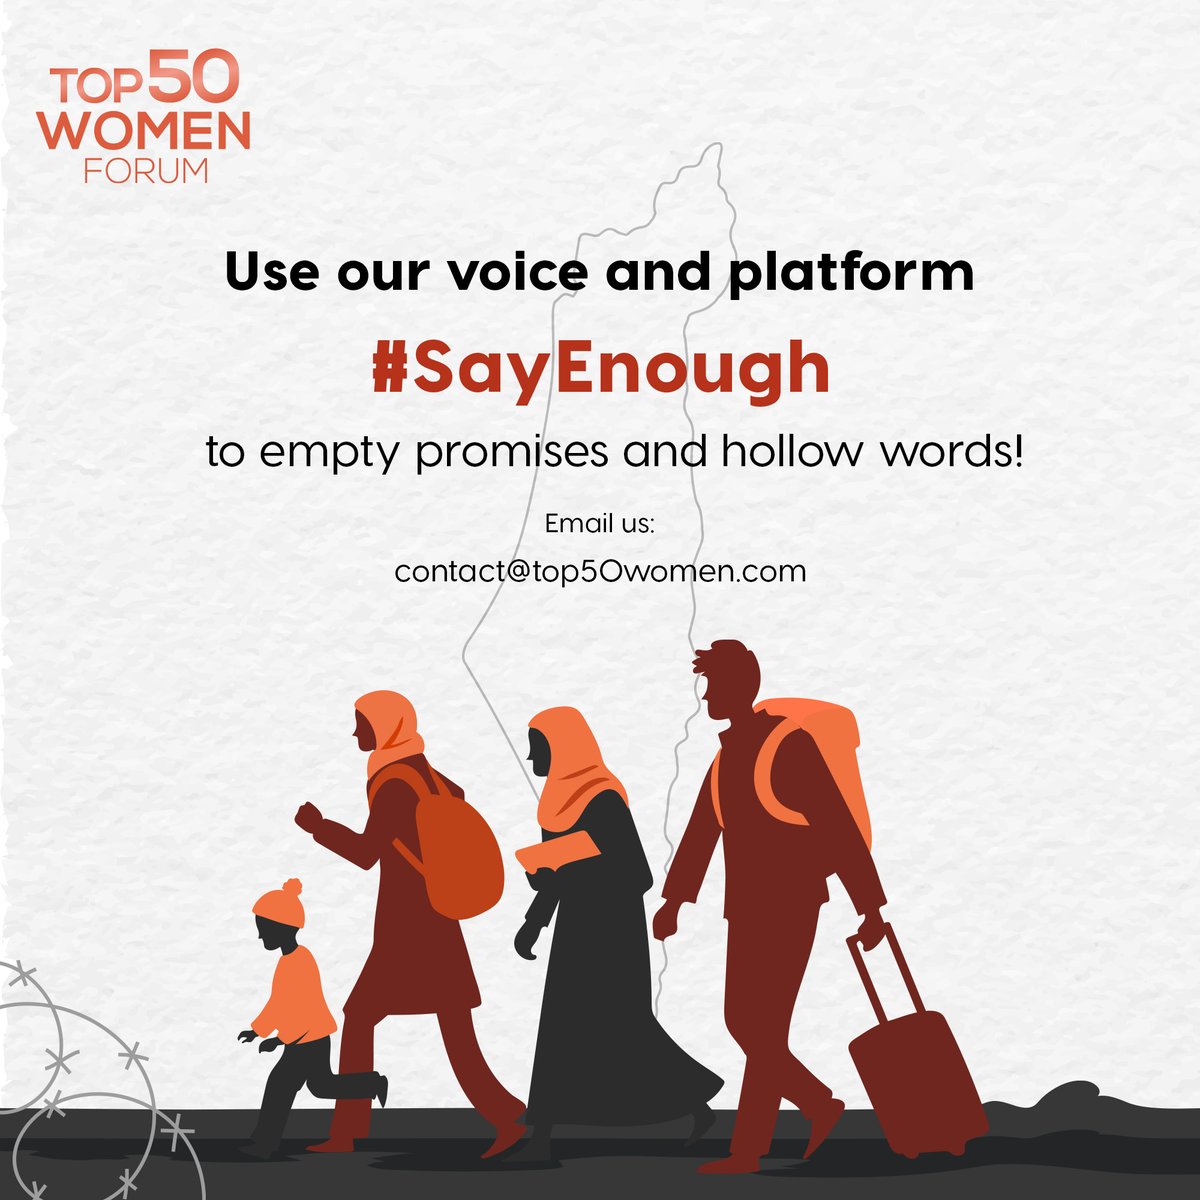 #SayEnough to the devastation left behind by war!

Let our voices amplify the cries of those suffering silently, demanding justice for the victims.

Email us: contact@top50women.com or DM us

#Top50WomenForum #Top50 #PalestinianWomen #WomenofPalestine #TheyAreSoulsNotNumbers